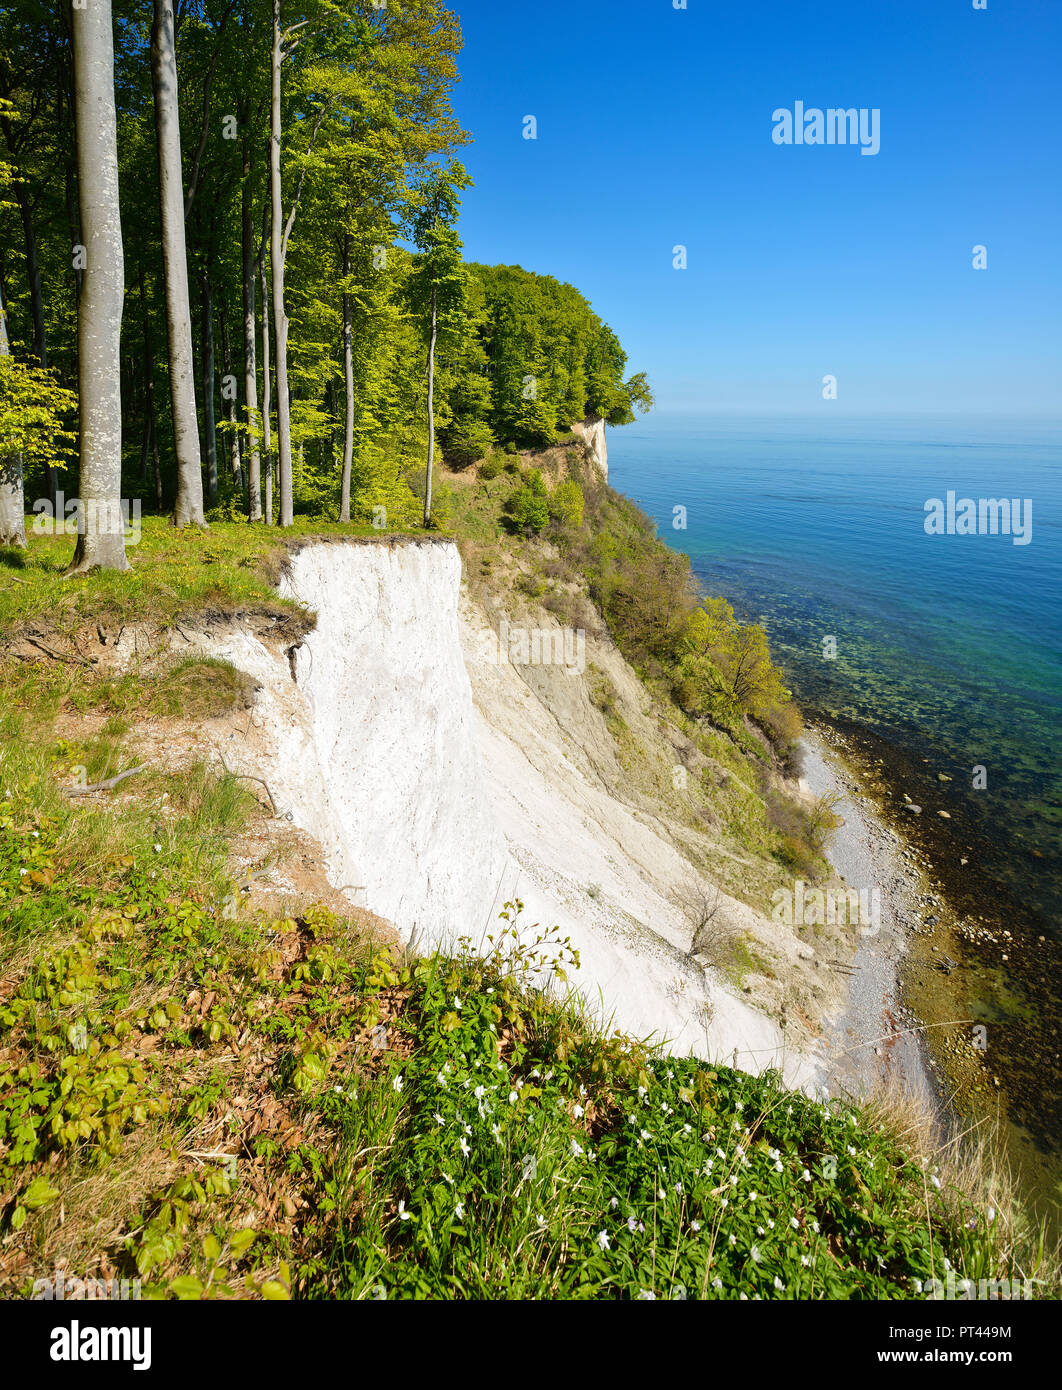 Germany, Mecklenburg-Vorpommern, Rügen Island, Jasmund National Park, view from the high shore to the Baltic Sea and the chalk cliffs, spring, beech forest on the steep bank, fresh green, wood anemone flower Stock Photo